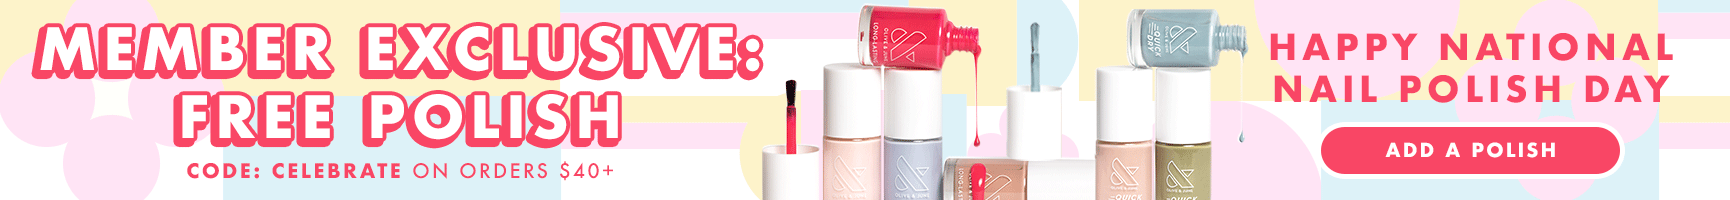 free polish extended code: celebrate- members get more days to shop - shop now